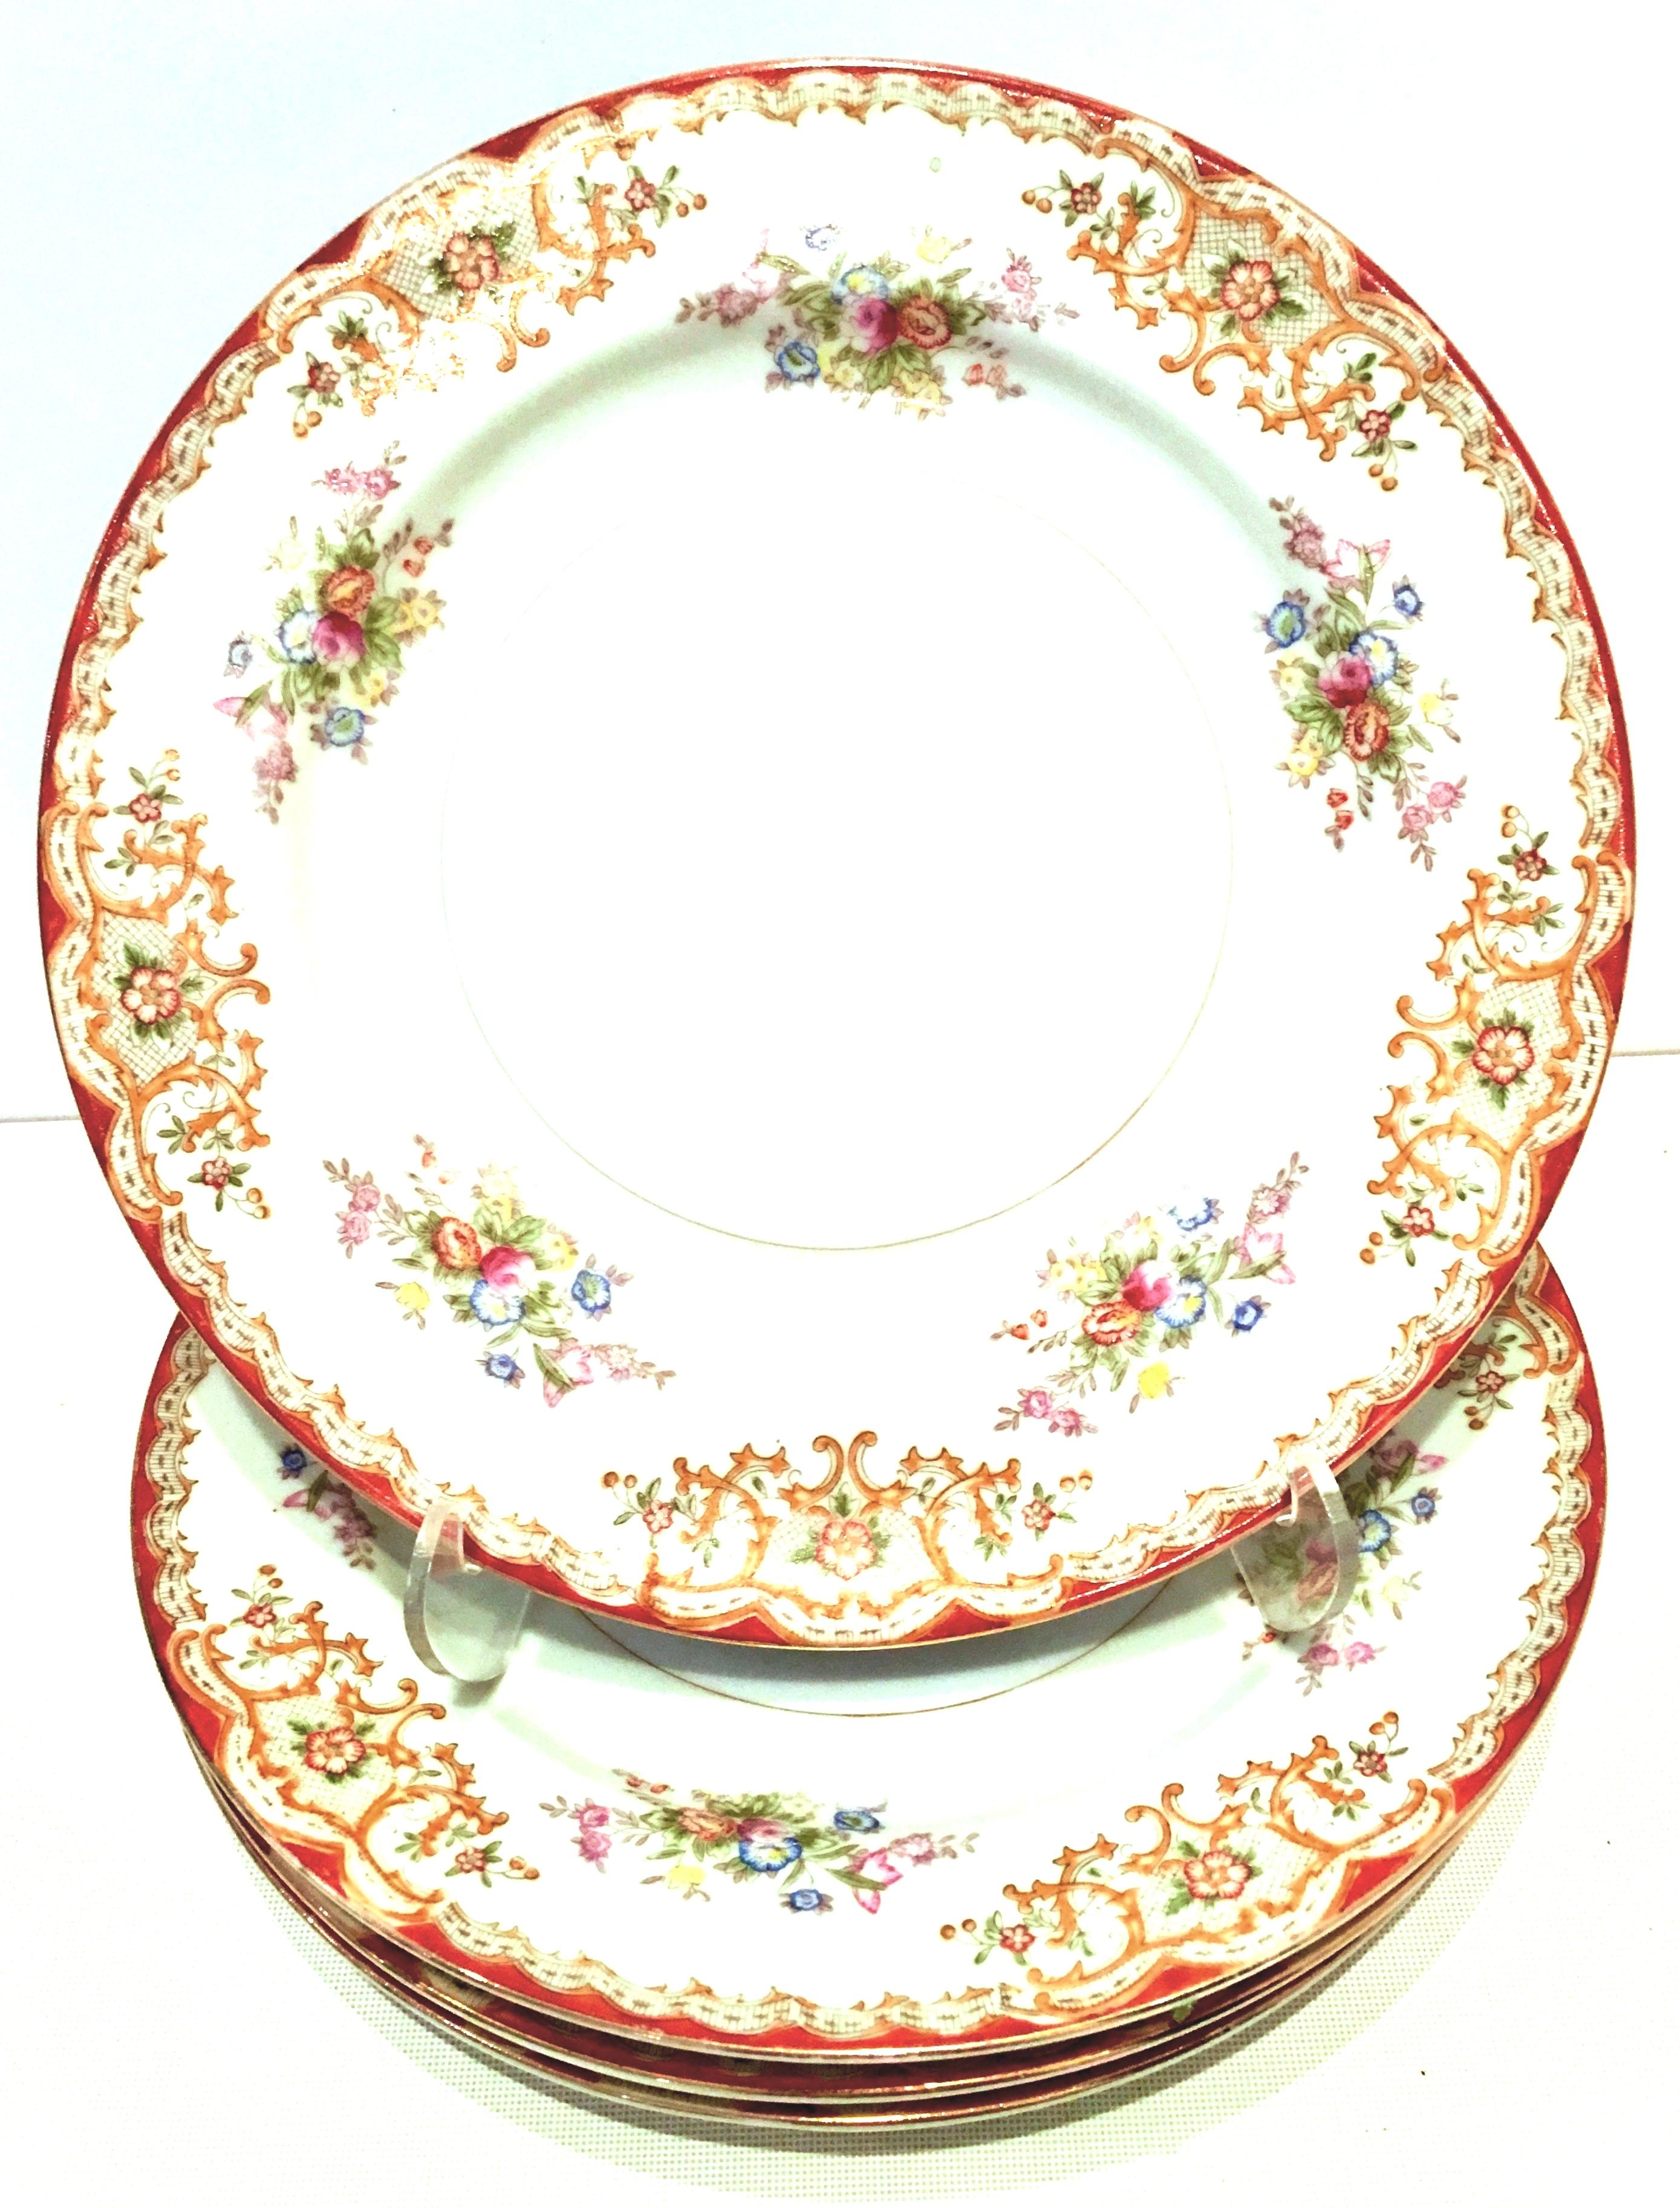 Art Nouveau Japanese hand-painted porcelain dinnerware, S/19 with 22-karat gold edge detail. Scroll and rose patter of off white ground with cream, orange, lavender, pink, yellow, and green floral and scroll details. Each piece is signed on the